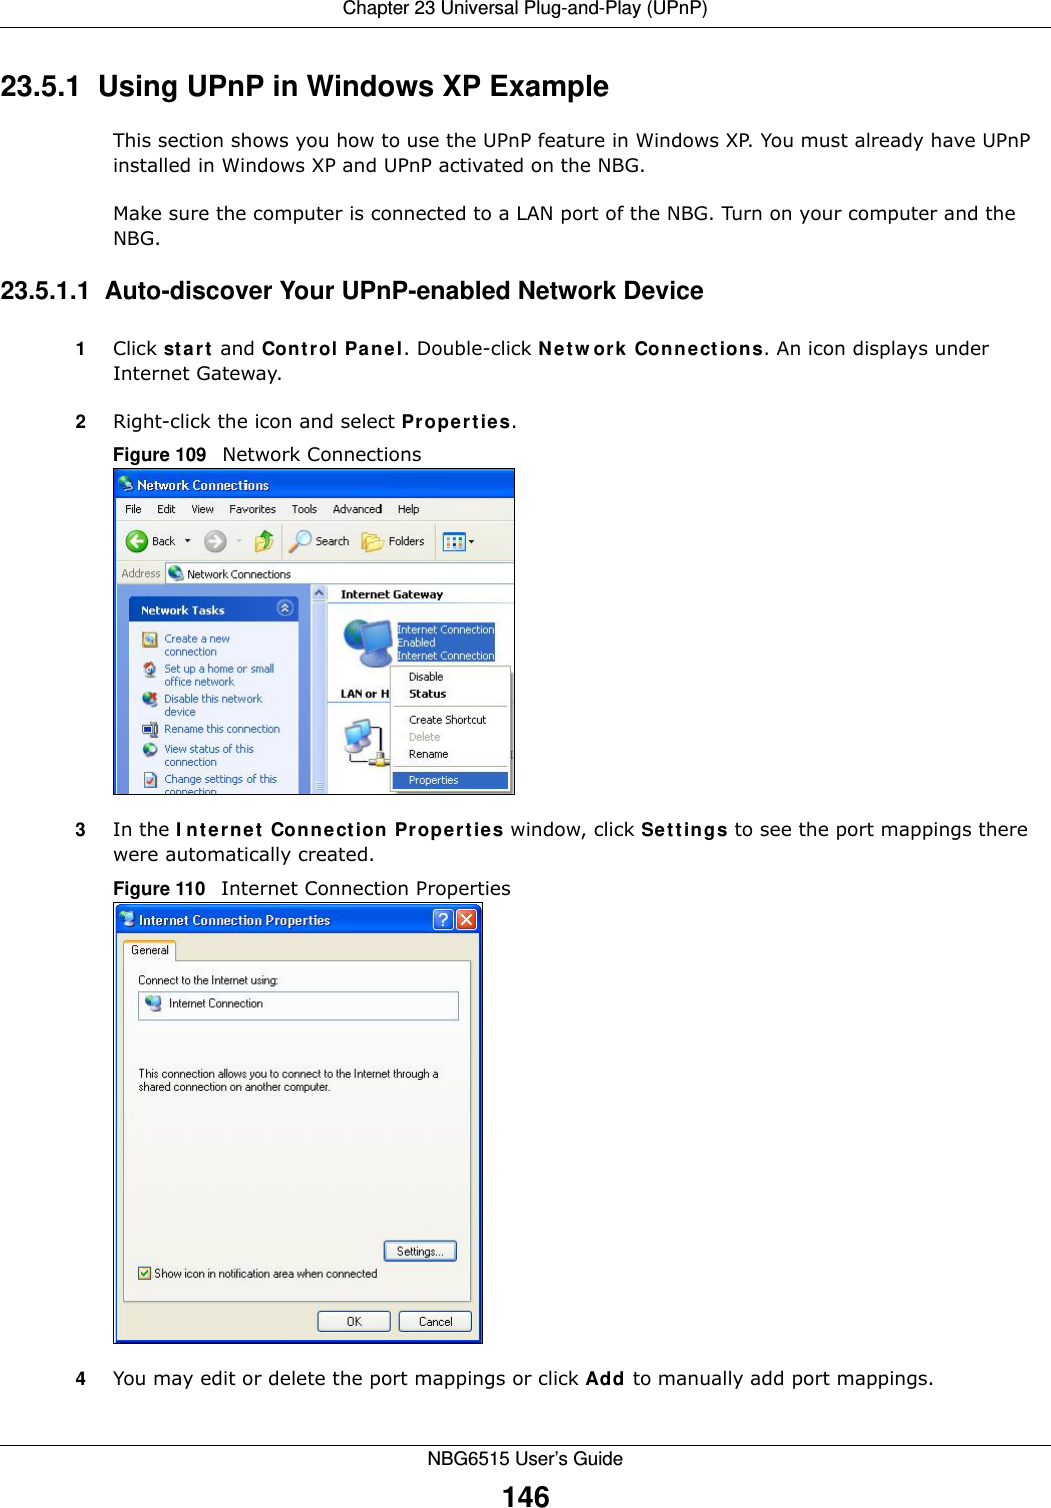 Chapter 23 Universal Plug-and-Play (UPnP)NBG6515 User’s Guide14623.5.1  Using UPnP in Windows XP ExampleThis section shows you how to use the UPnP feature in Windows XP. You must already have UPnP installed in Windows XP and UPnP activated on the NBG.Make sure the computer is connected to a LAN port of the NBG. Turn on your computer and the NBG. 23.5.1.1  Auto-discover Your UPnP-enabled Network Device1Click start and Control Panel. Double-click Network Connections. An icon displays under Internet Gateway.2Right-click the icon and select Properties. Figure 109   Network Connections3In the Internet Connection Properties window, click Settings to see the port mappings there were automatically created. Figure 110   Internet Connection Properties 4You may edit or delete the port mappings or click Add to manually add port mappings. 